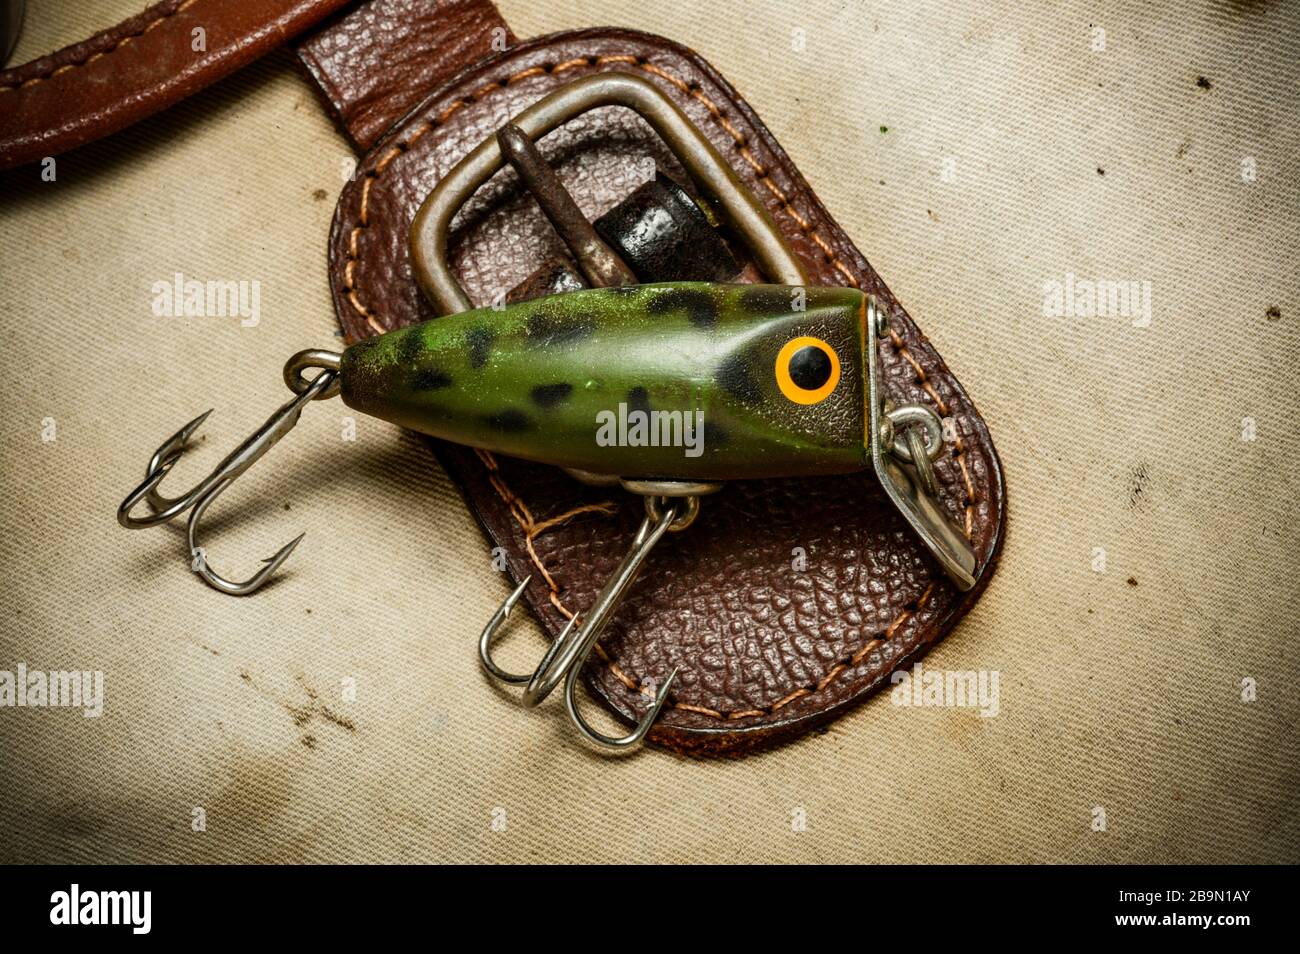 An example of a vintage fishing lure equipped with treble hooks